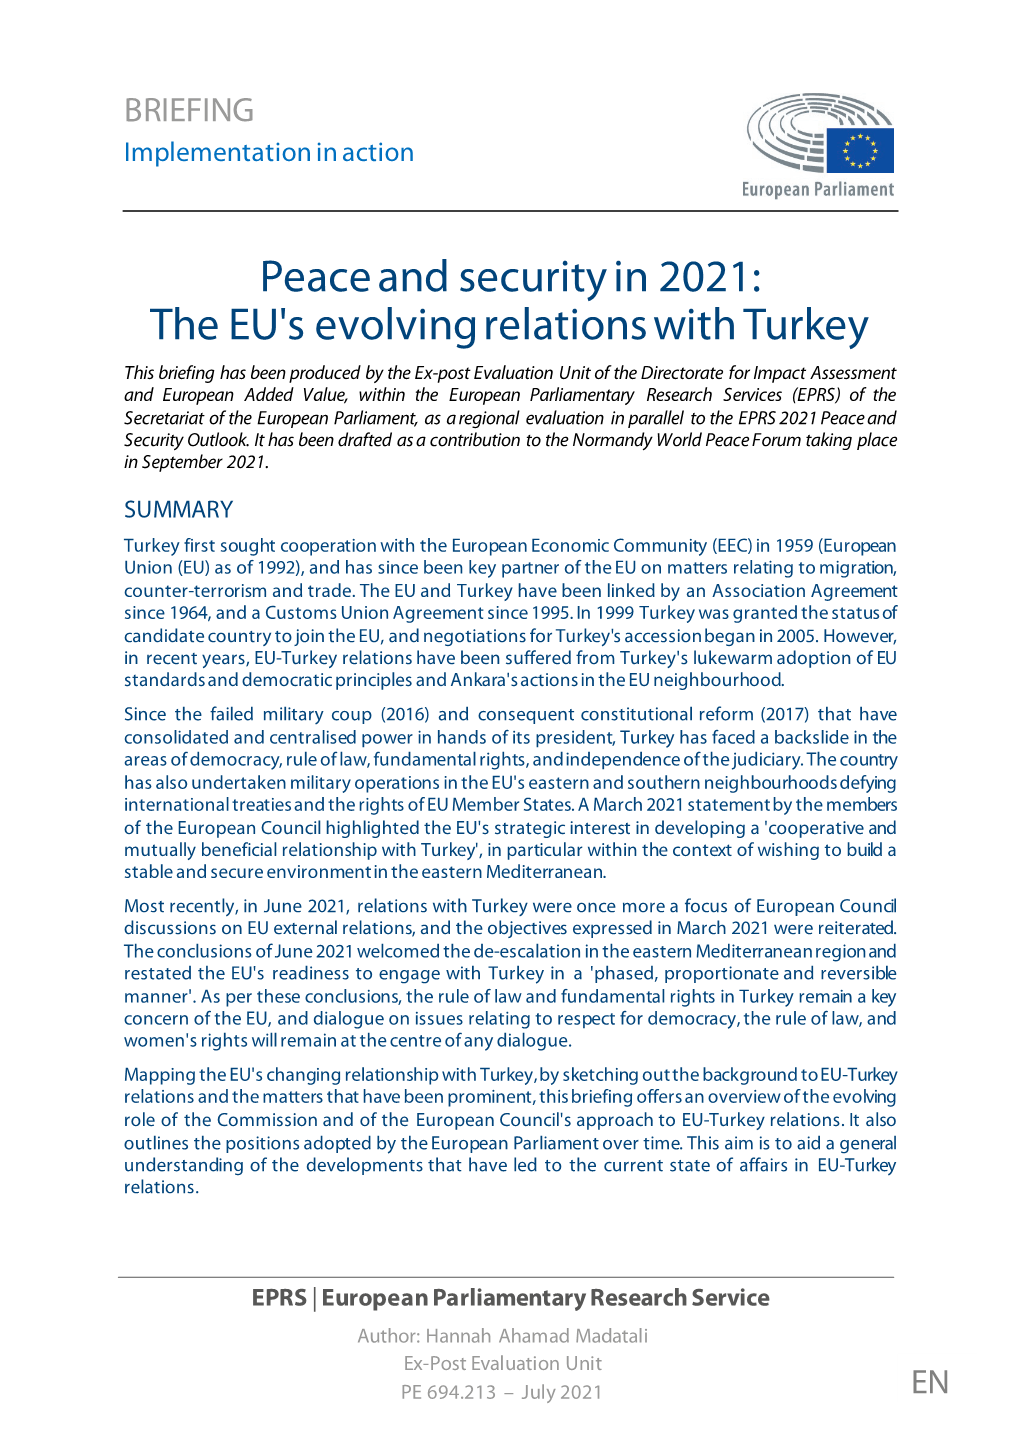 Peace and Security in 2021: the EU's Evolving Relations with Turkey